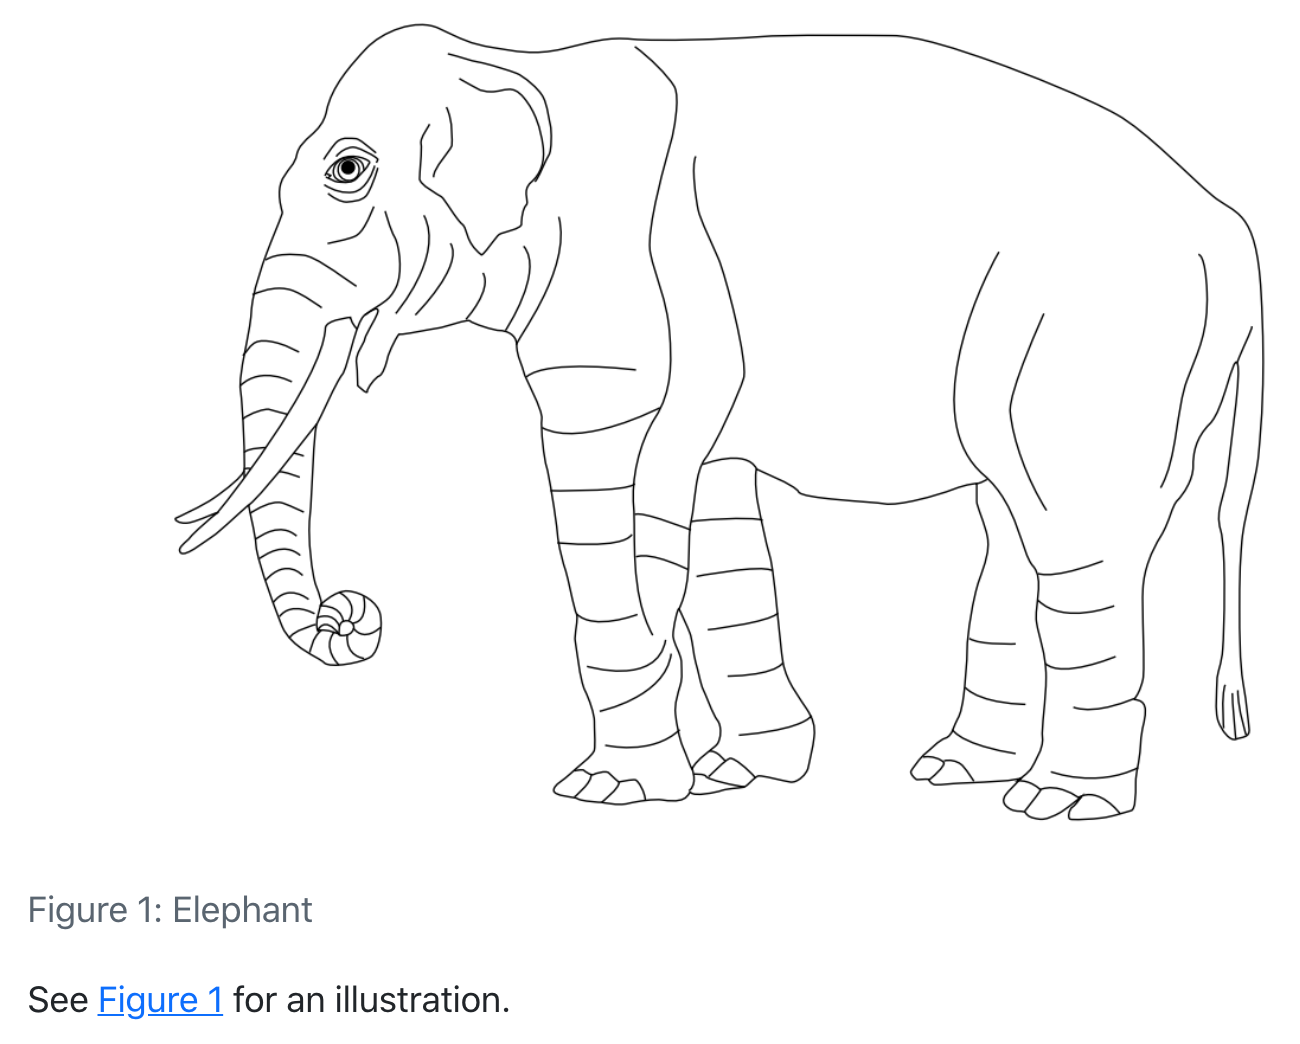 A line drawing of an elephant. The caption 'Figure 1: Elephant' is centered beneath it.